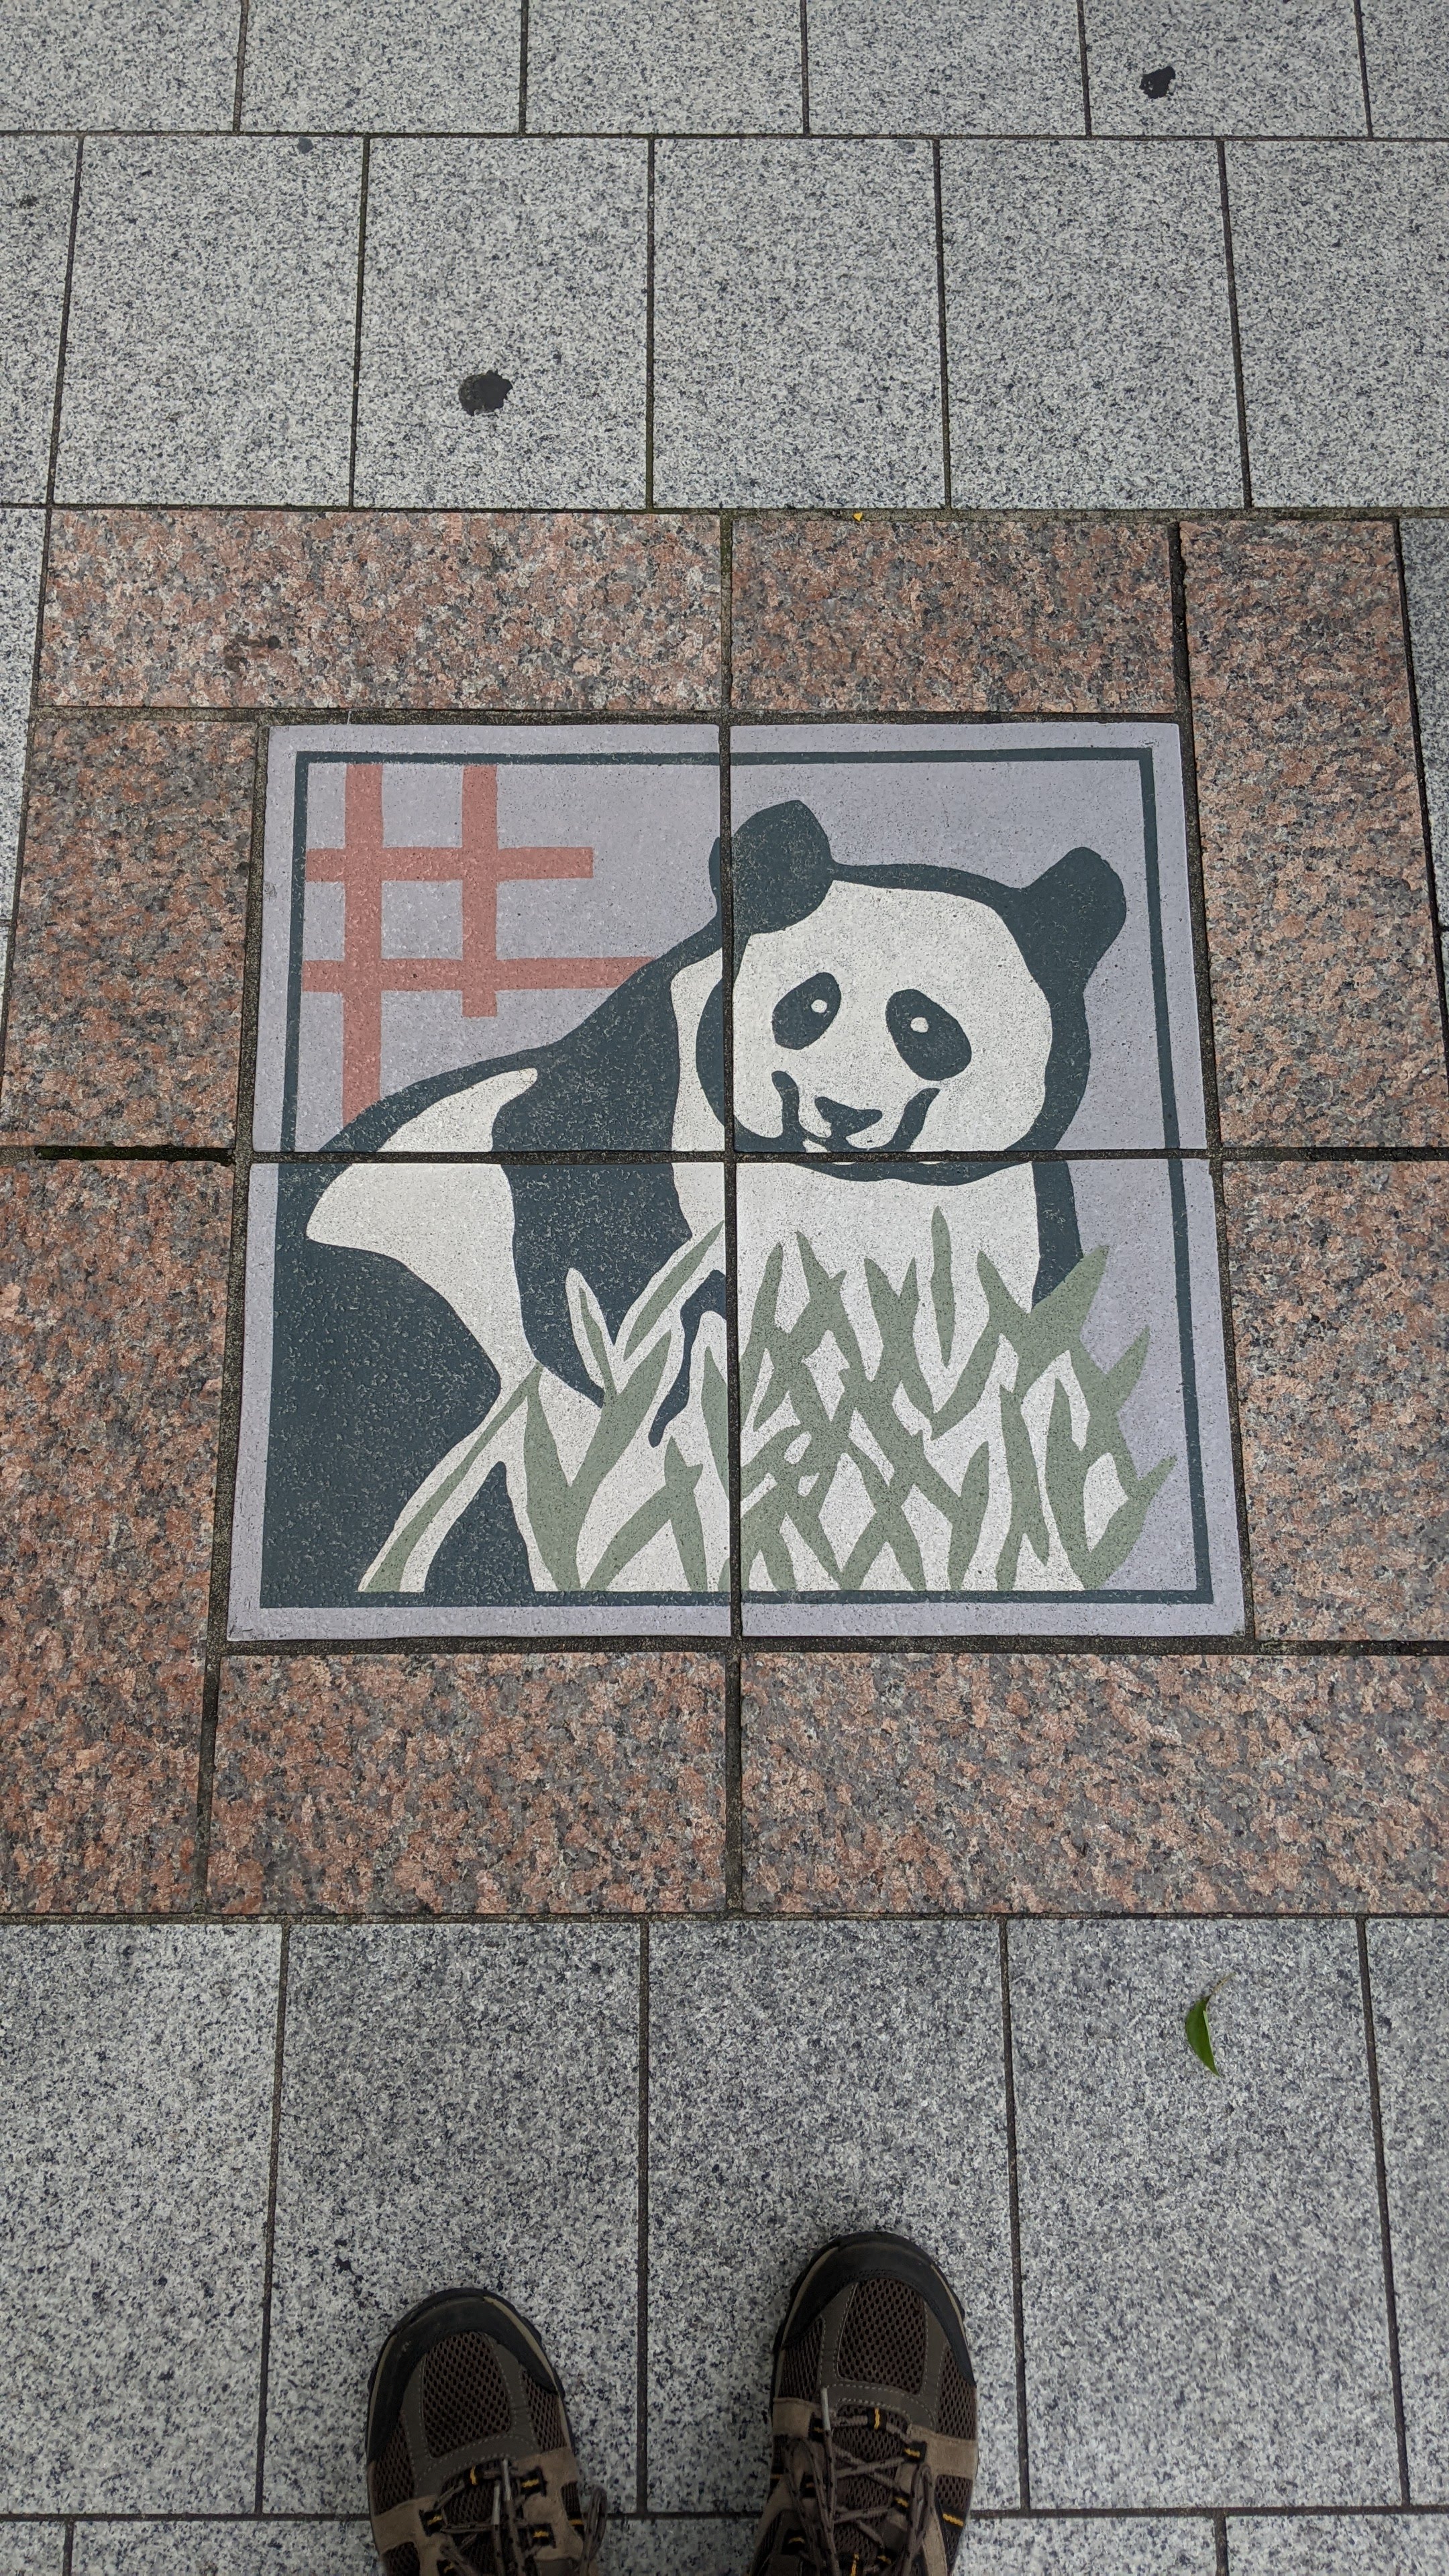 An image of a panda made up of four tiles on the sidewalk